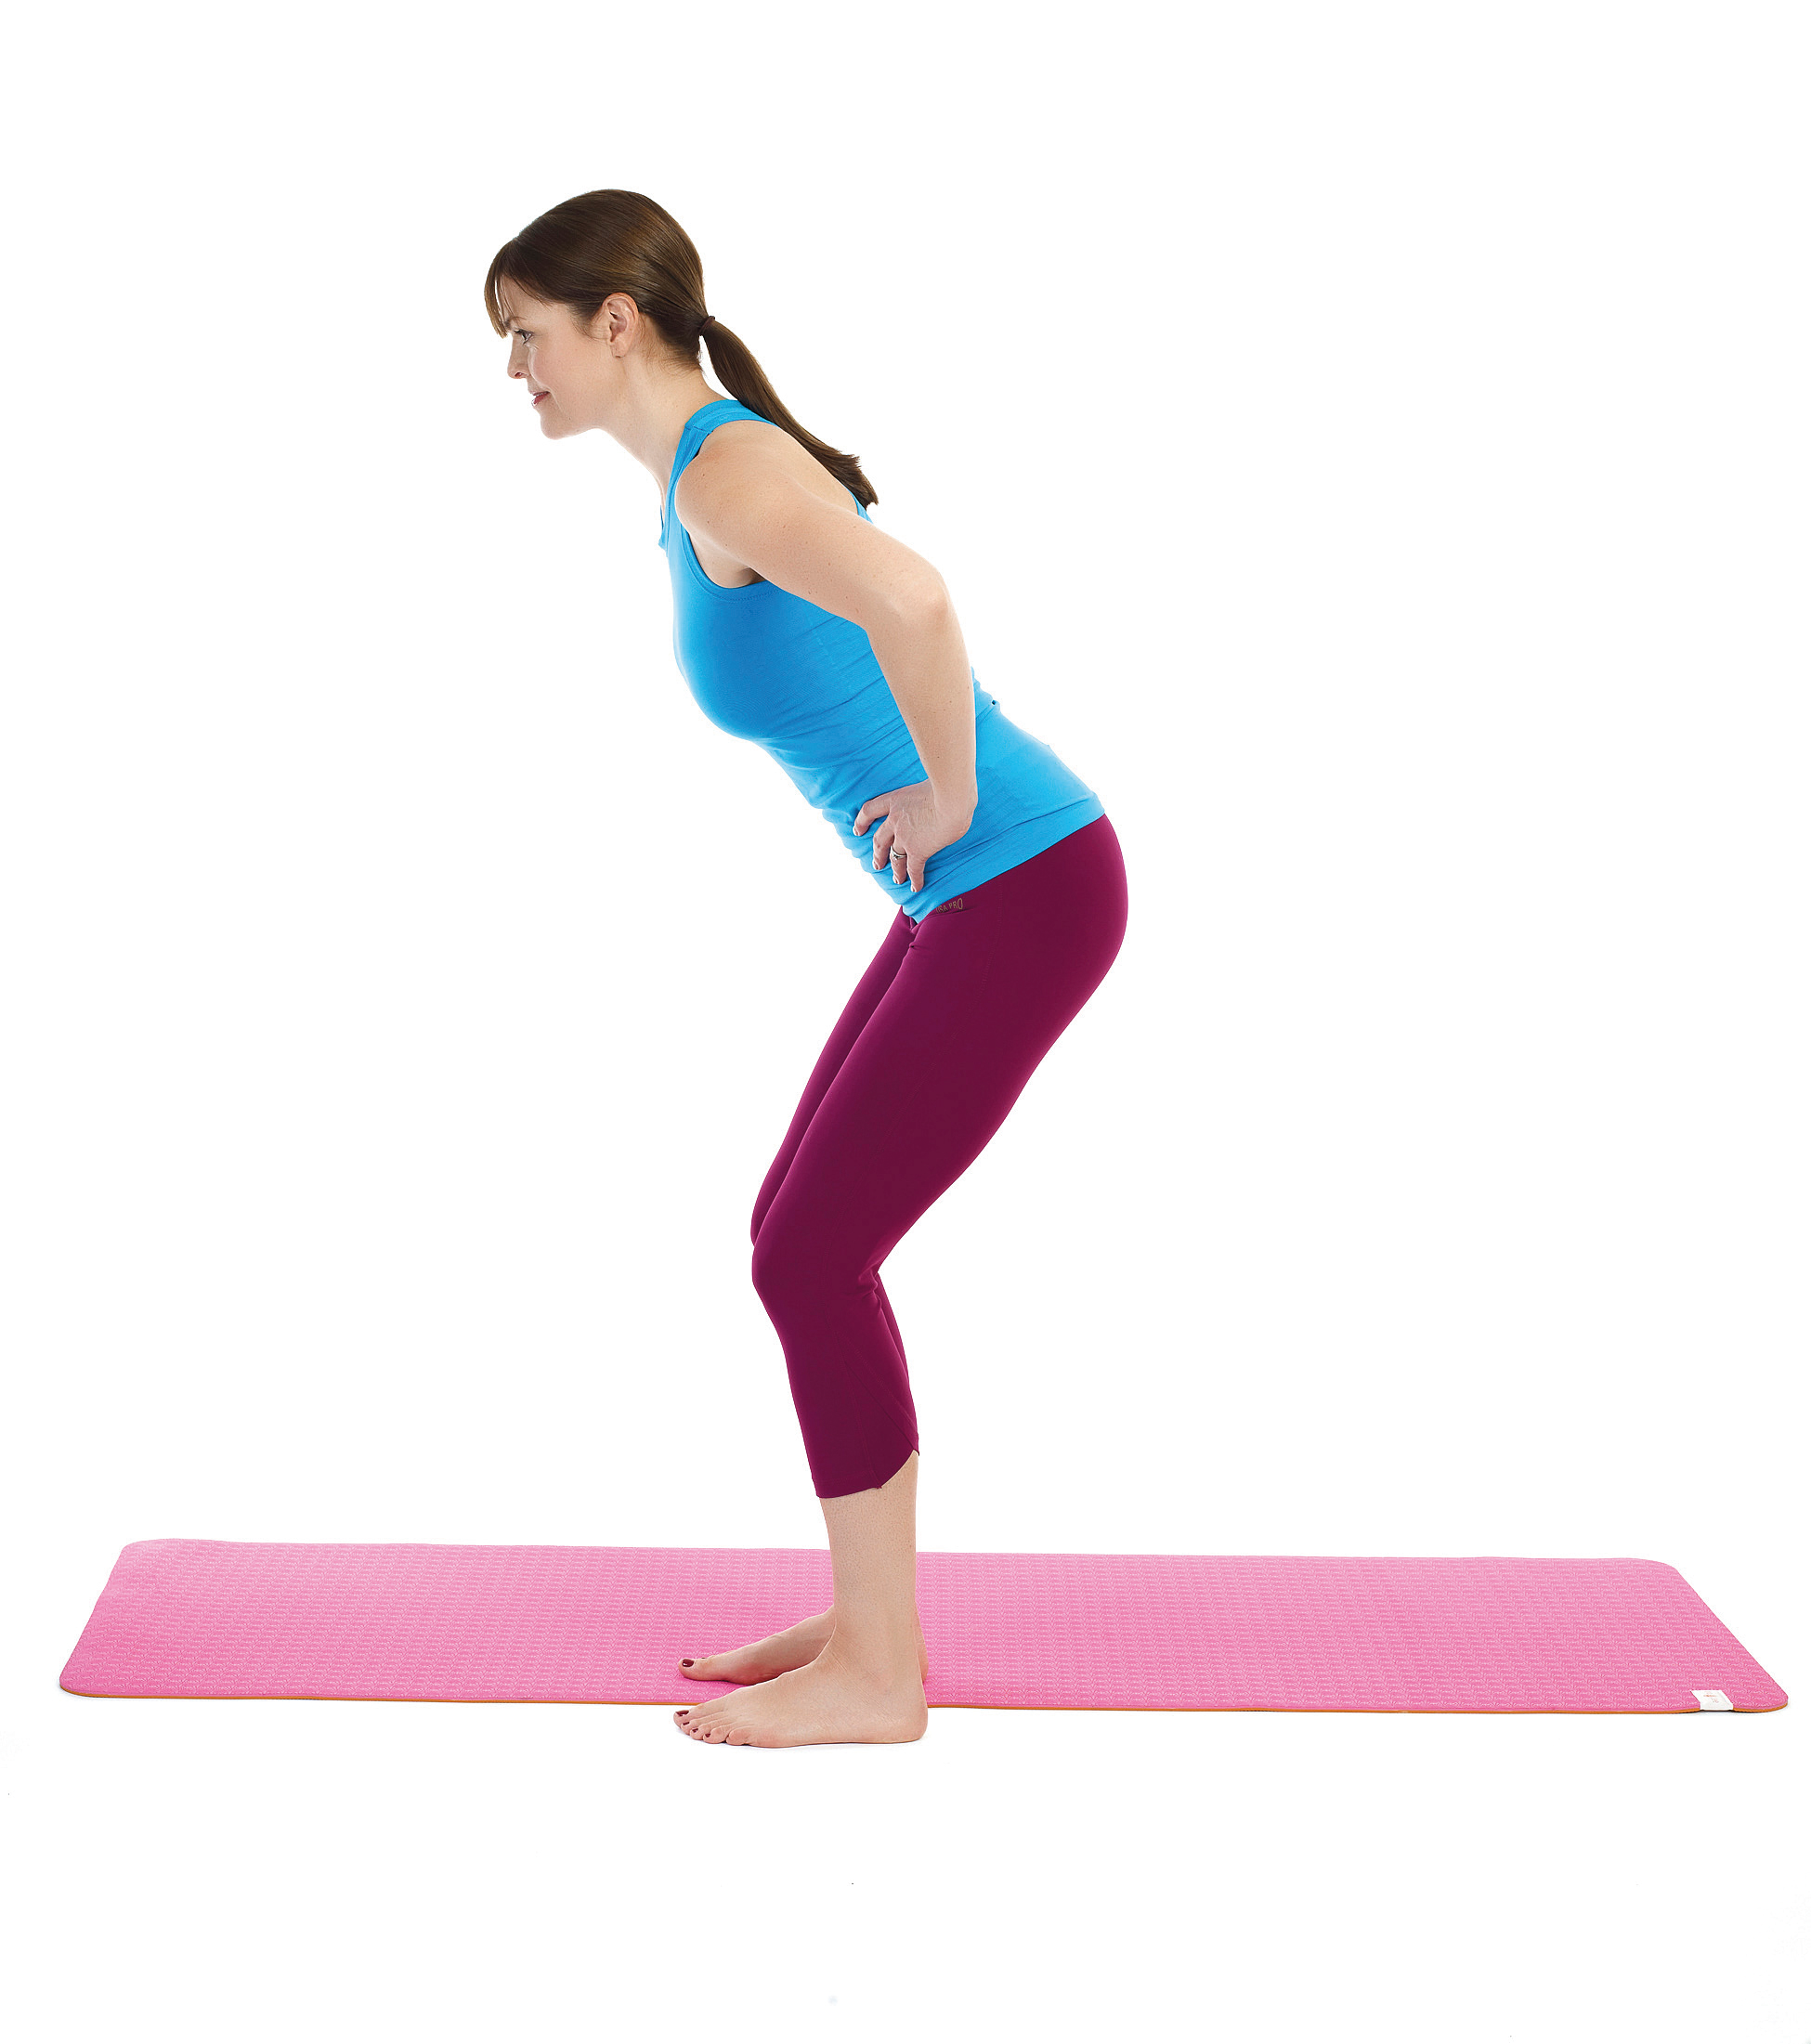 fitness woman demonstrating scooter exercise in Pilates